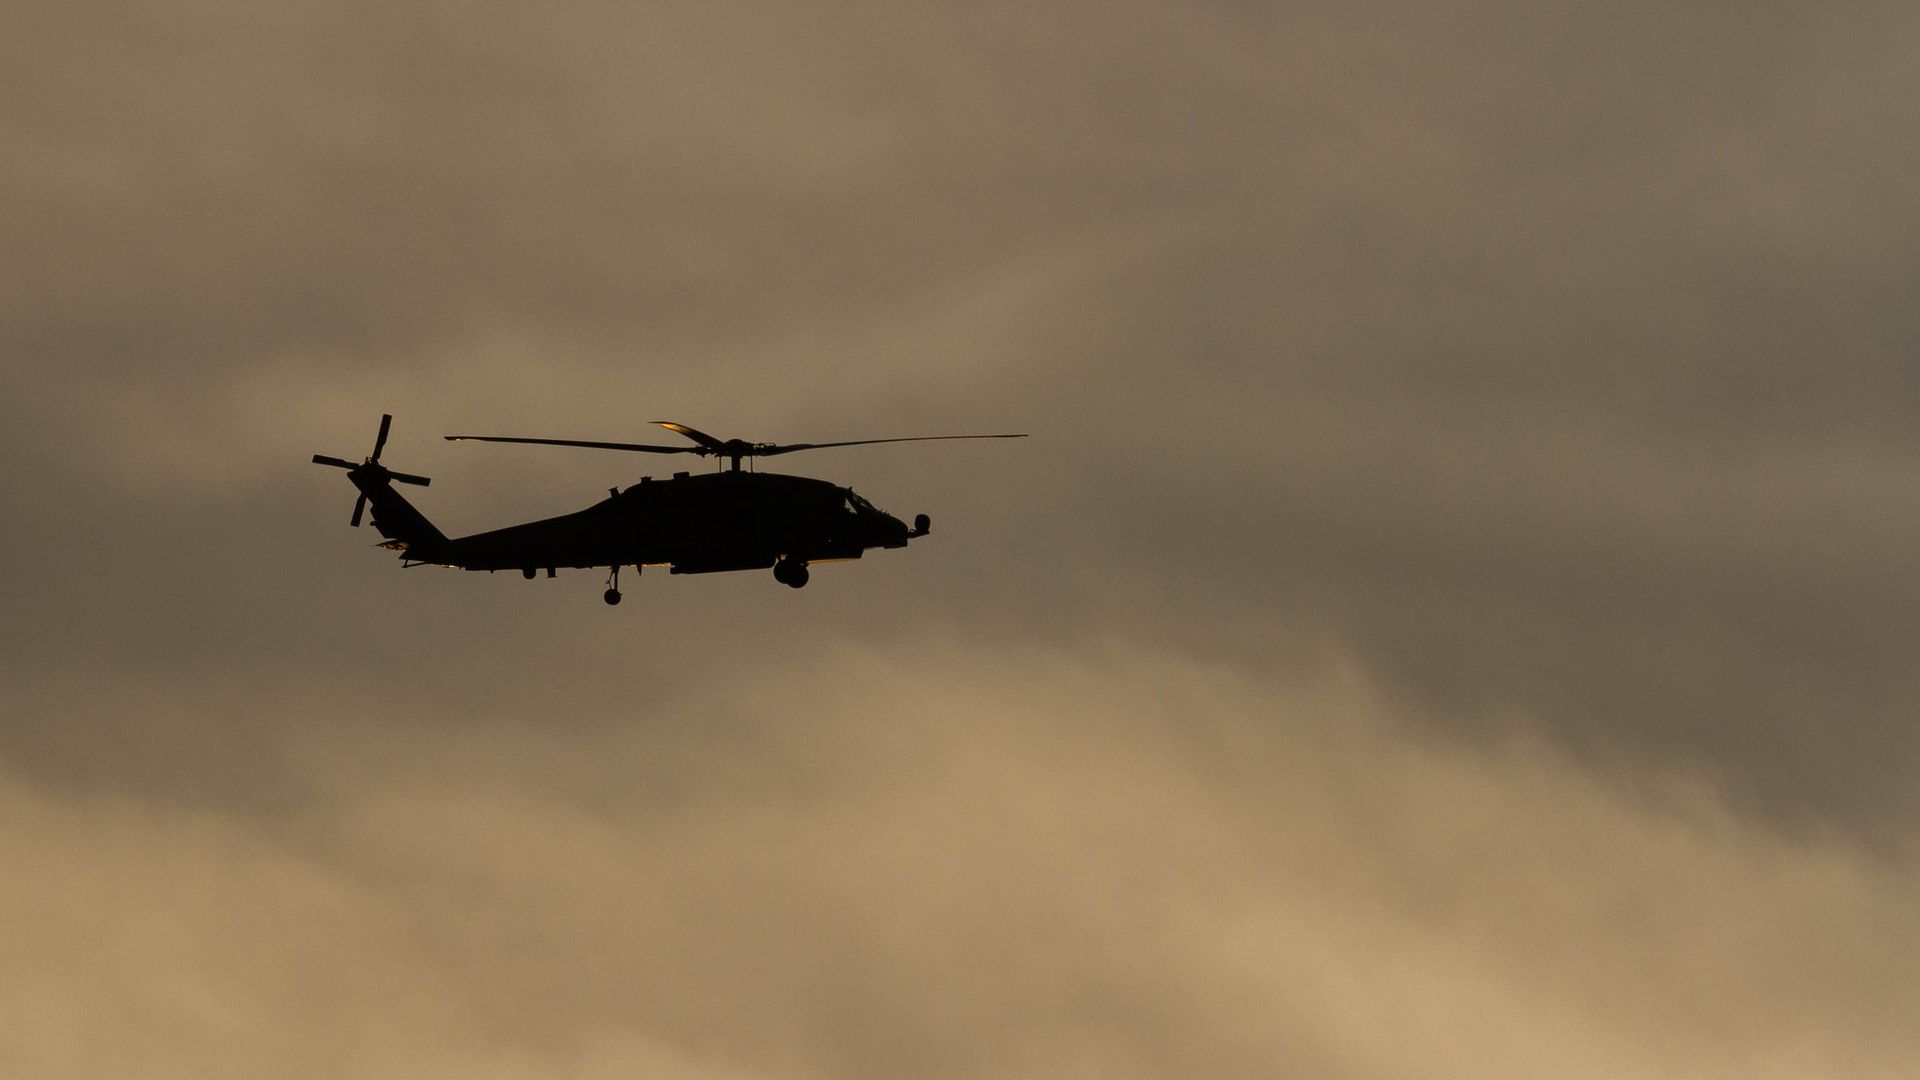 A silhouette of a US Navy Sikorsky SH-60R Seahawk helicopter with the the Maritime Strike Squadron 51 .